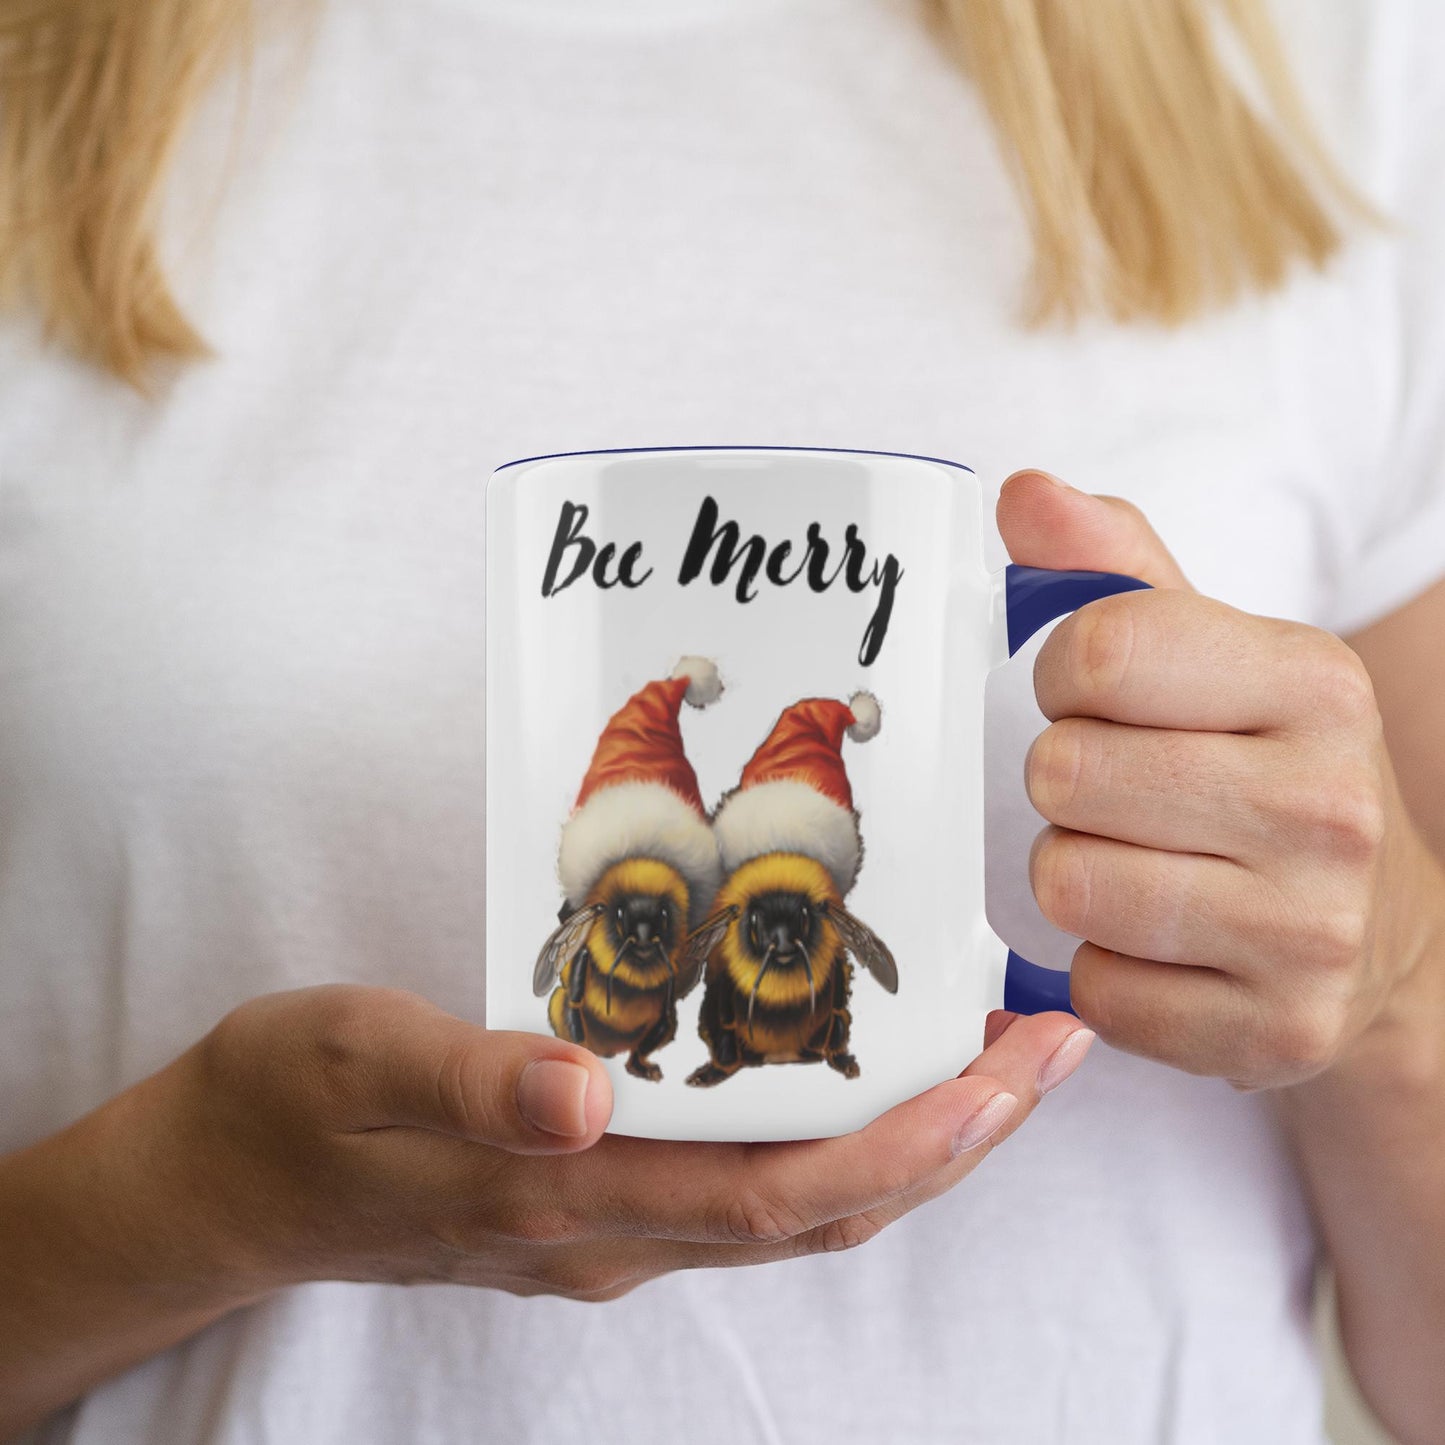 Bee Merry Accent Mug 11 oz White With Dark Blue Accents Coffee & Tea Cups gifts holiday store